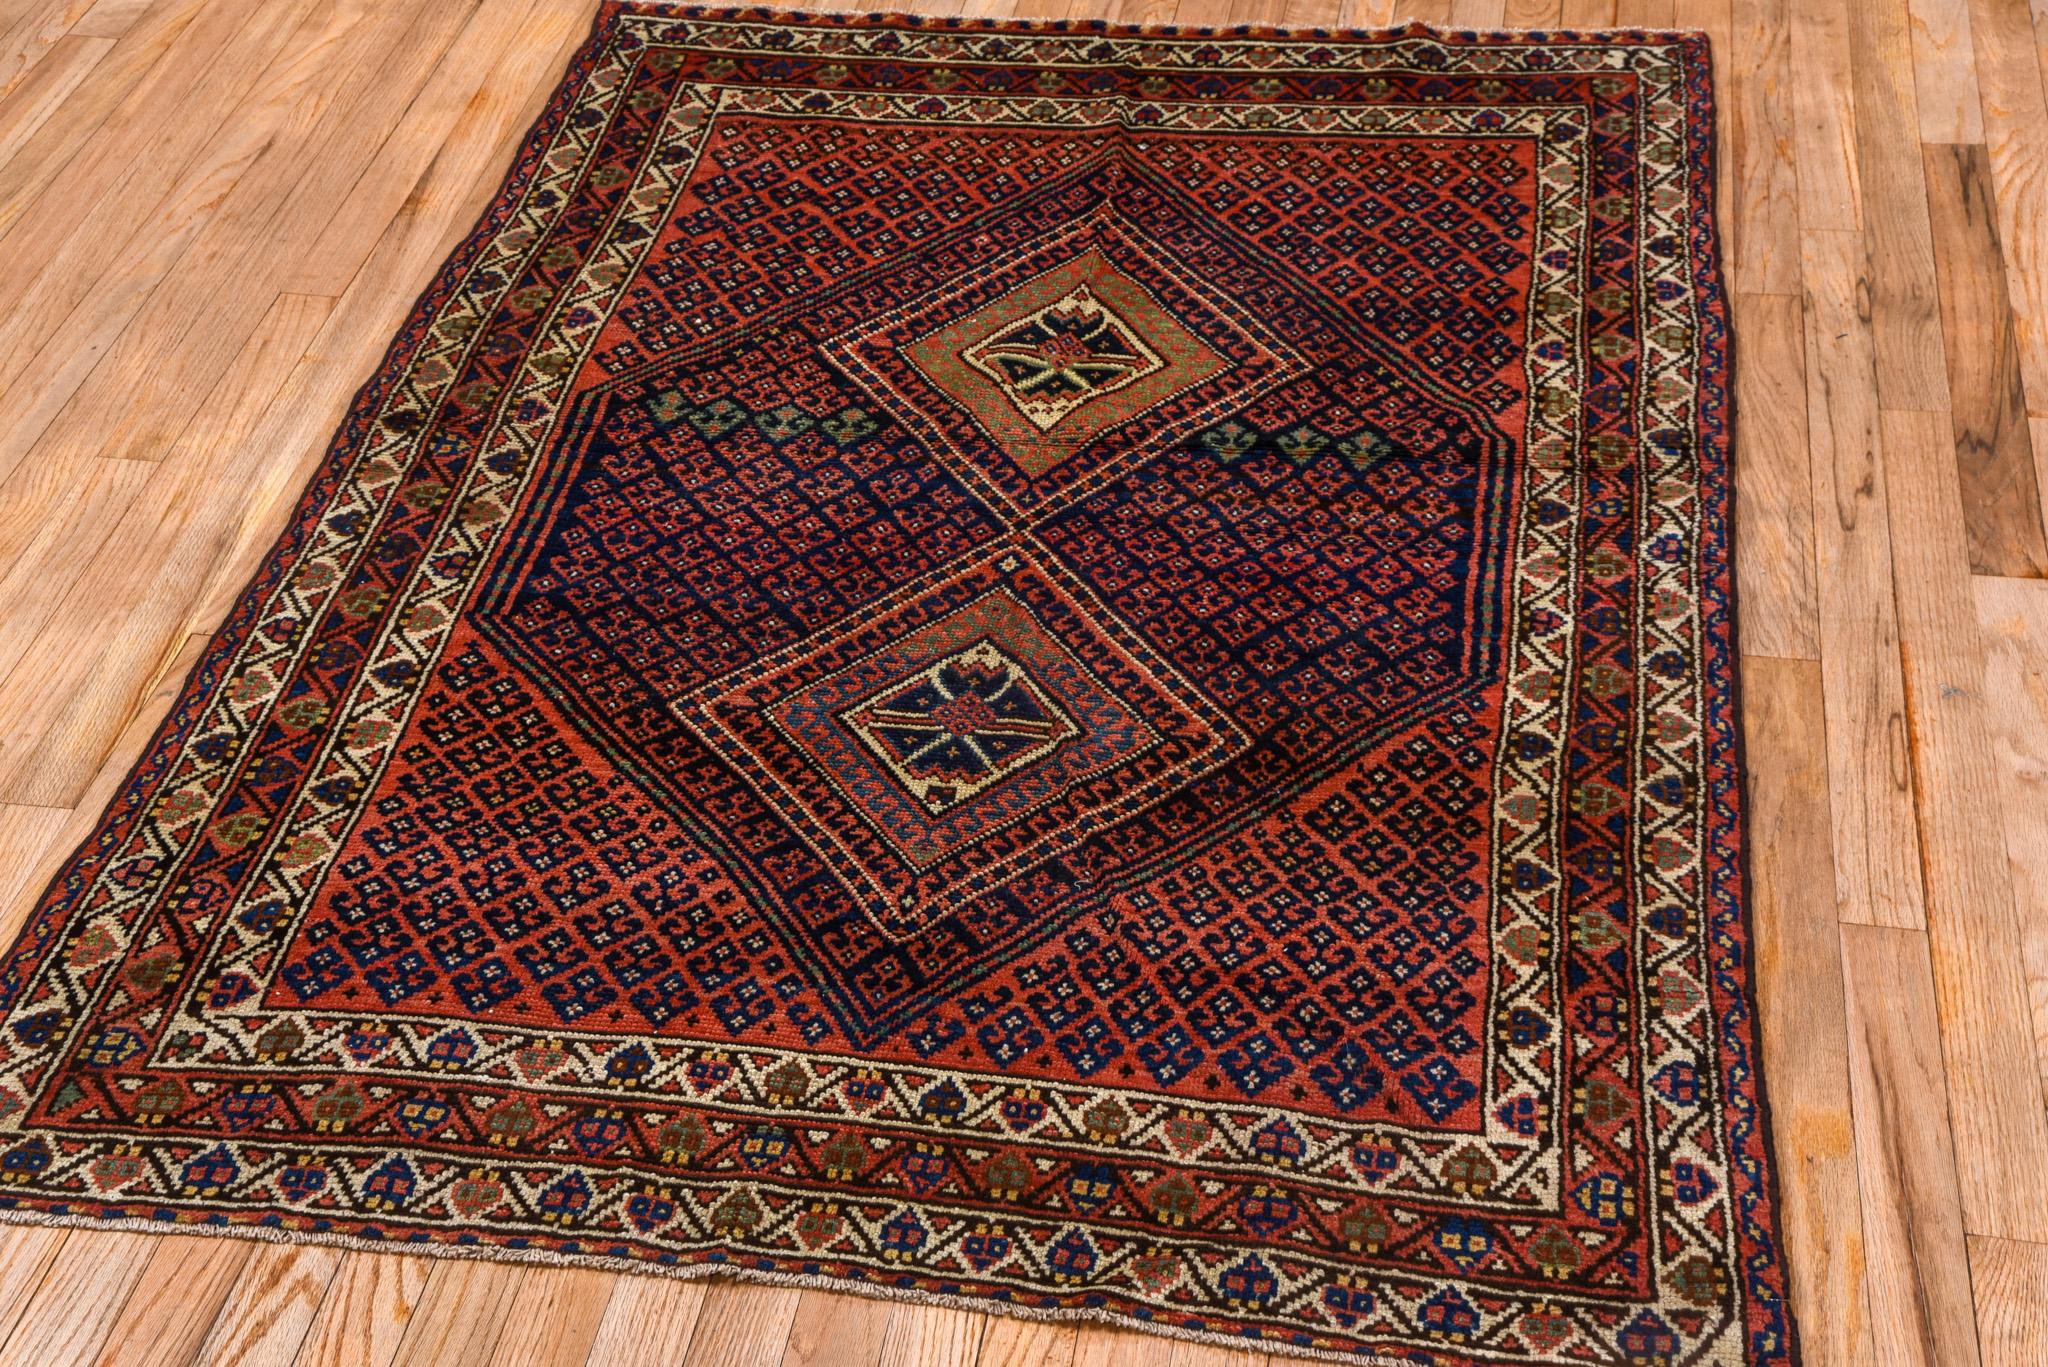 A Malayer Rug circa 1930. Handknotted with 100% wool yarn.